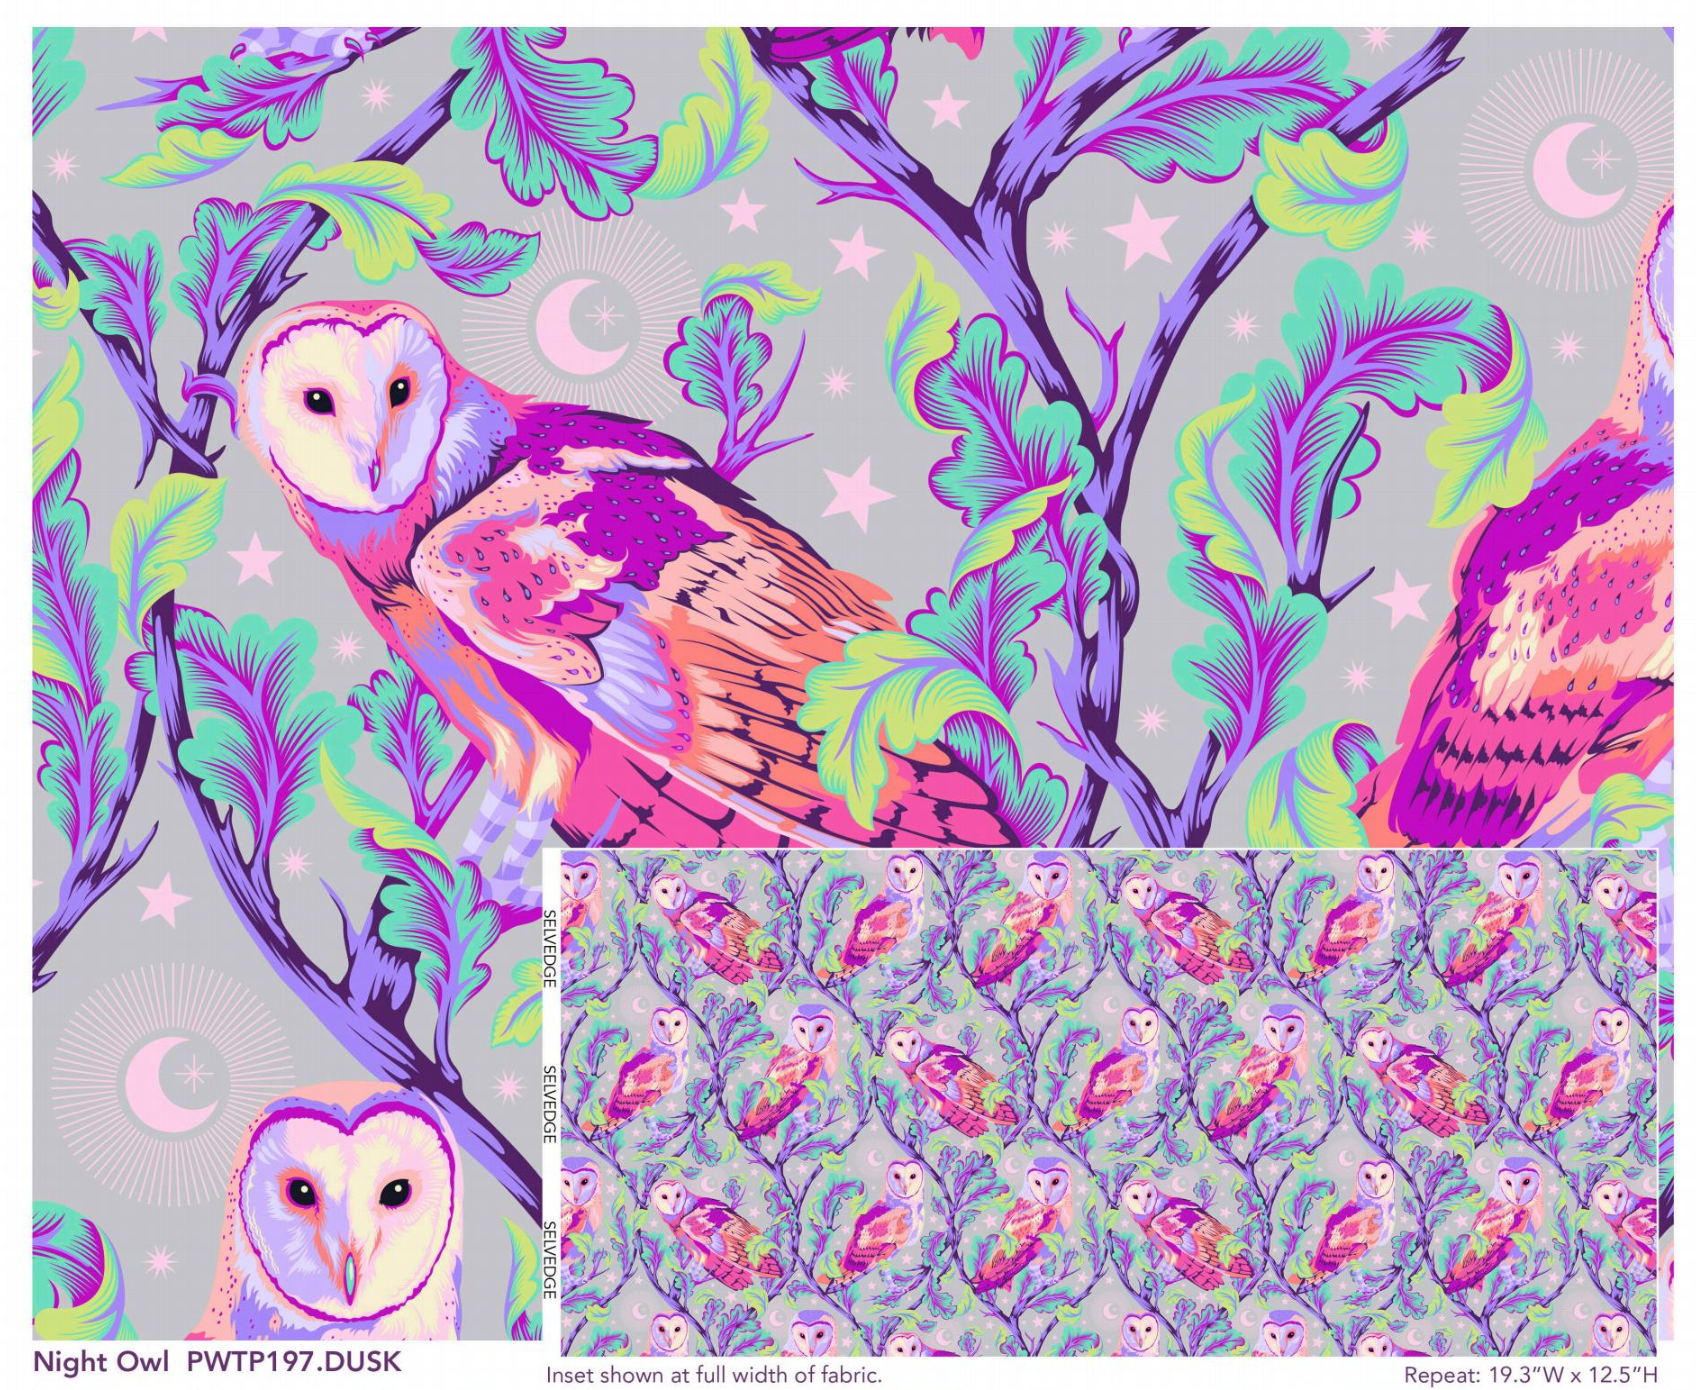 Tula Pink Moon garden owls in purple and teal and grey showing full width range and detail